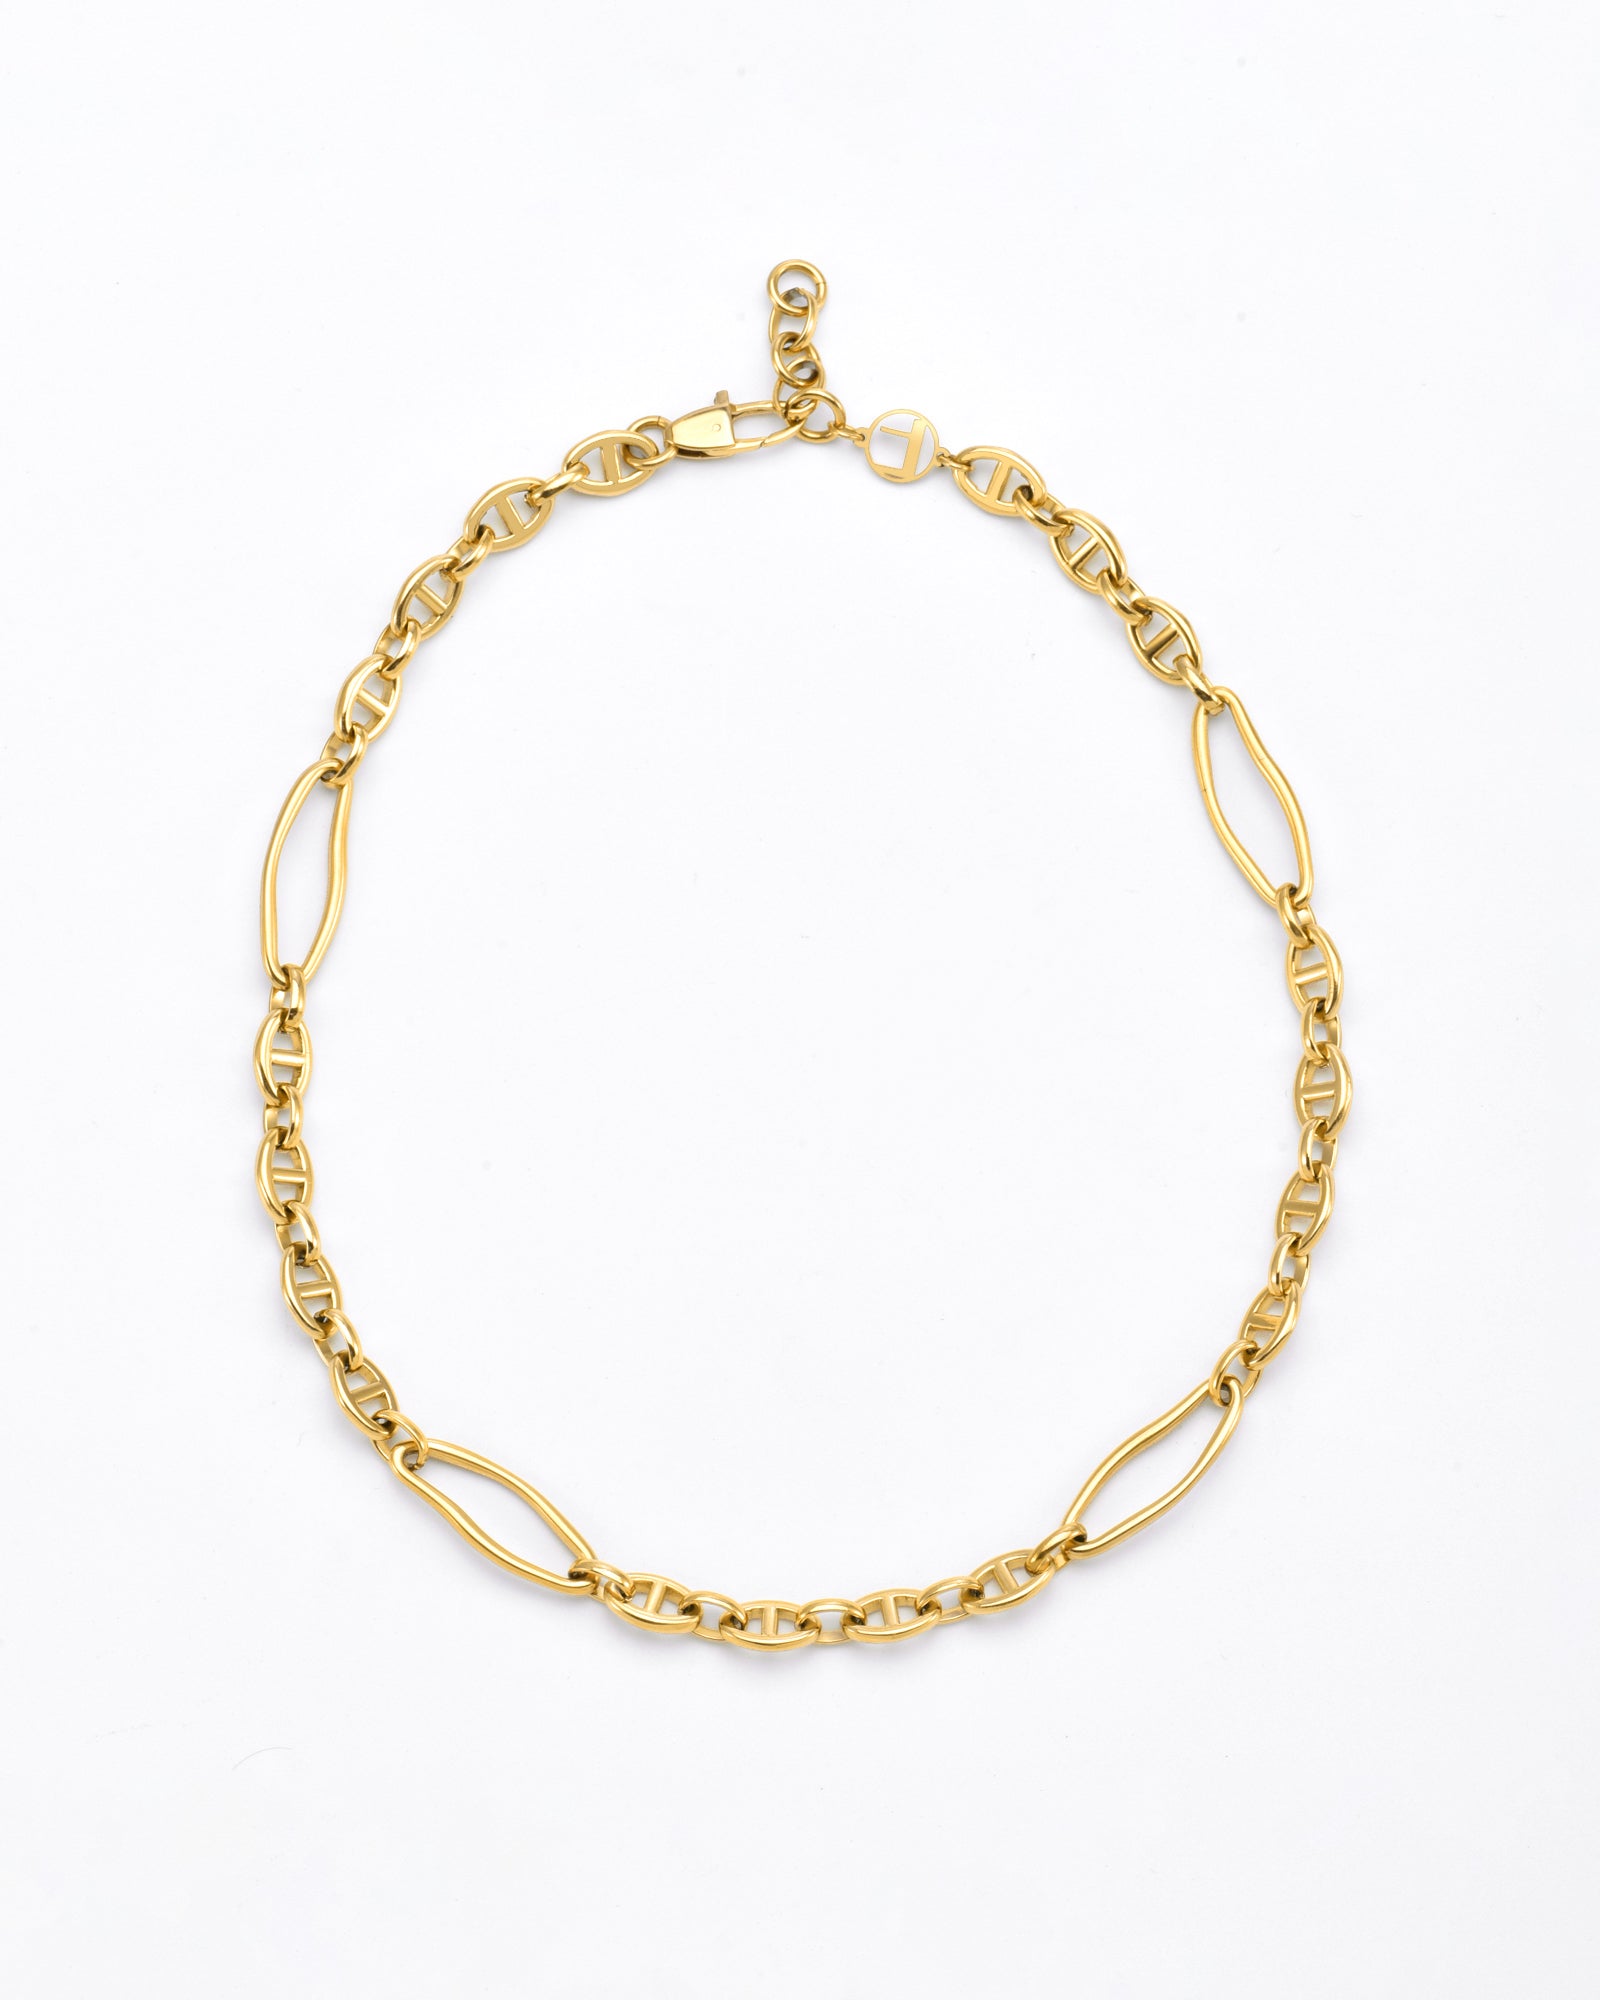 A For Art&#39;s Sake® Portrait Necklace Gold with an alternating pattern of small and elongated oval links. The design is intricate, with each link contributing to an elegant and sophisticated appearance. This portrait necklace features a clasp at the top center, set against a plain white background.